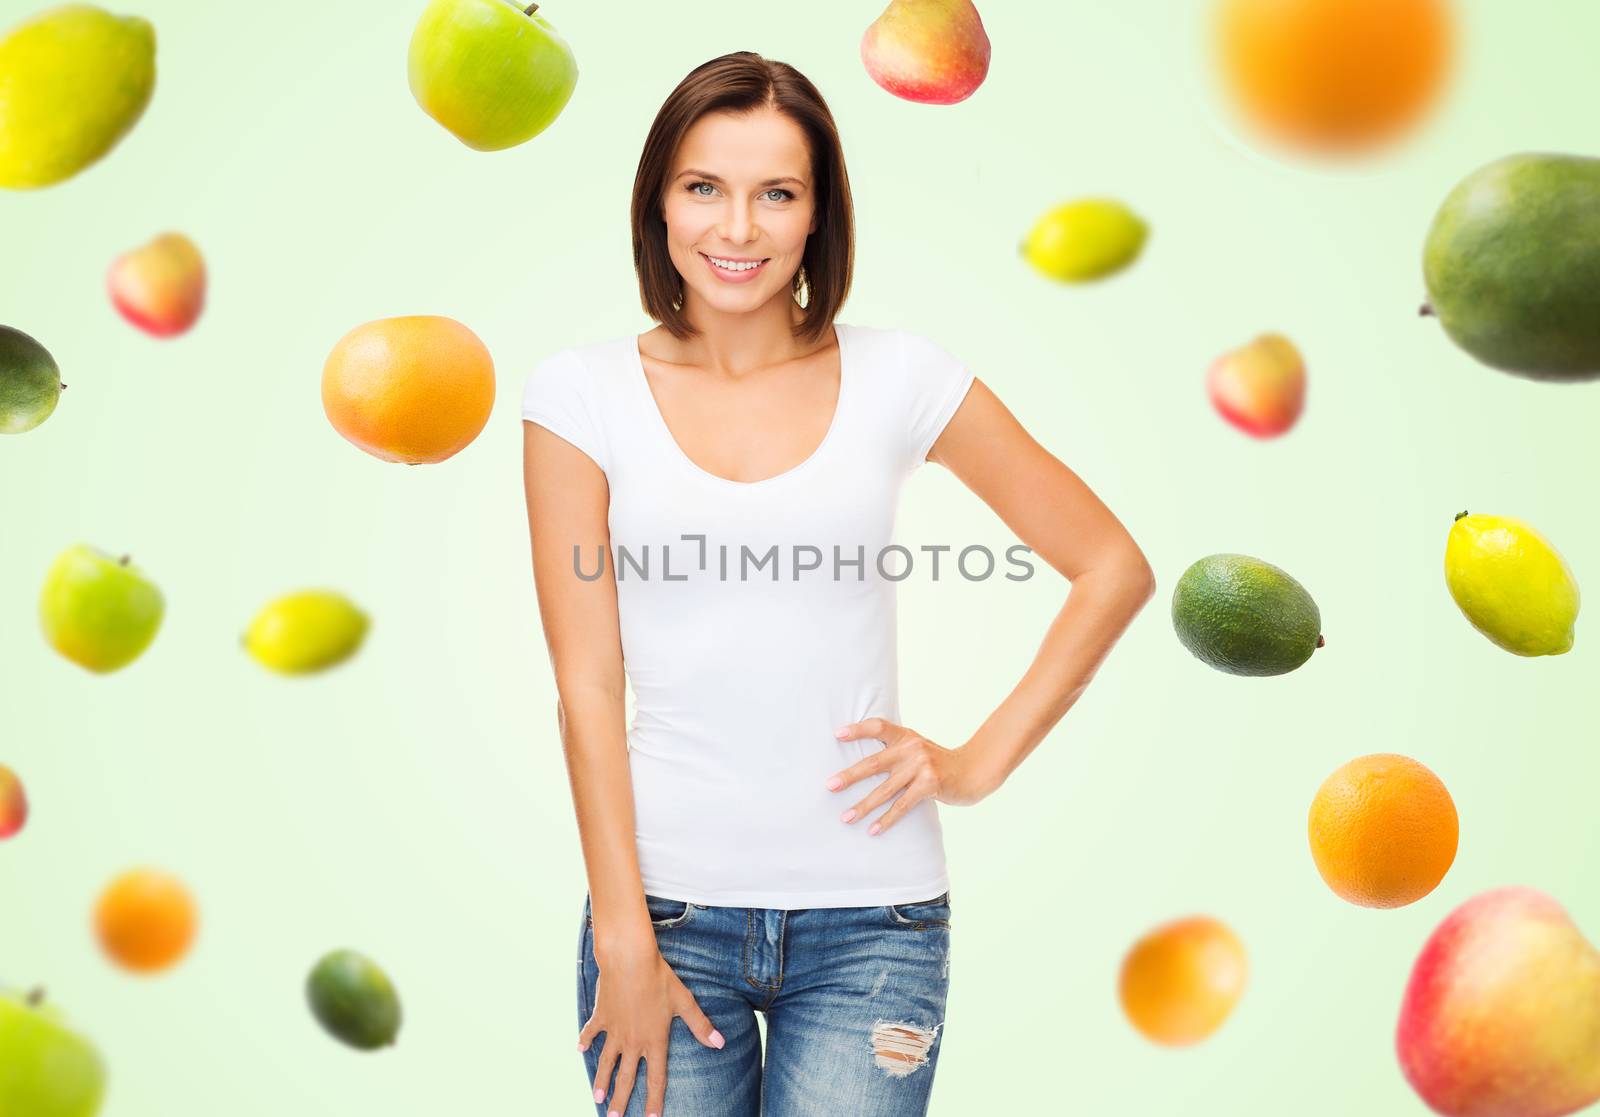 people, advertisement, diet, food and healthy eating concept - happy woman in blank white t-shirt over fruits on green background